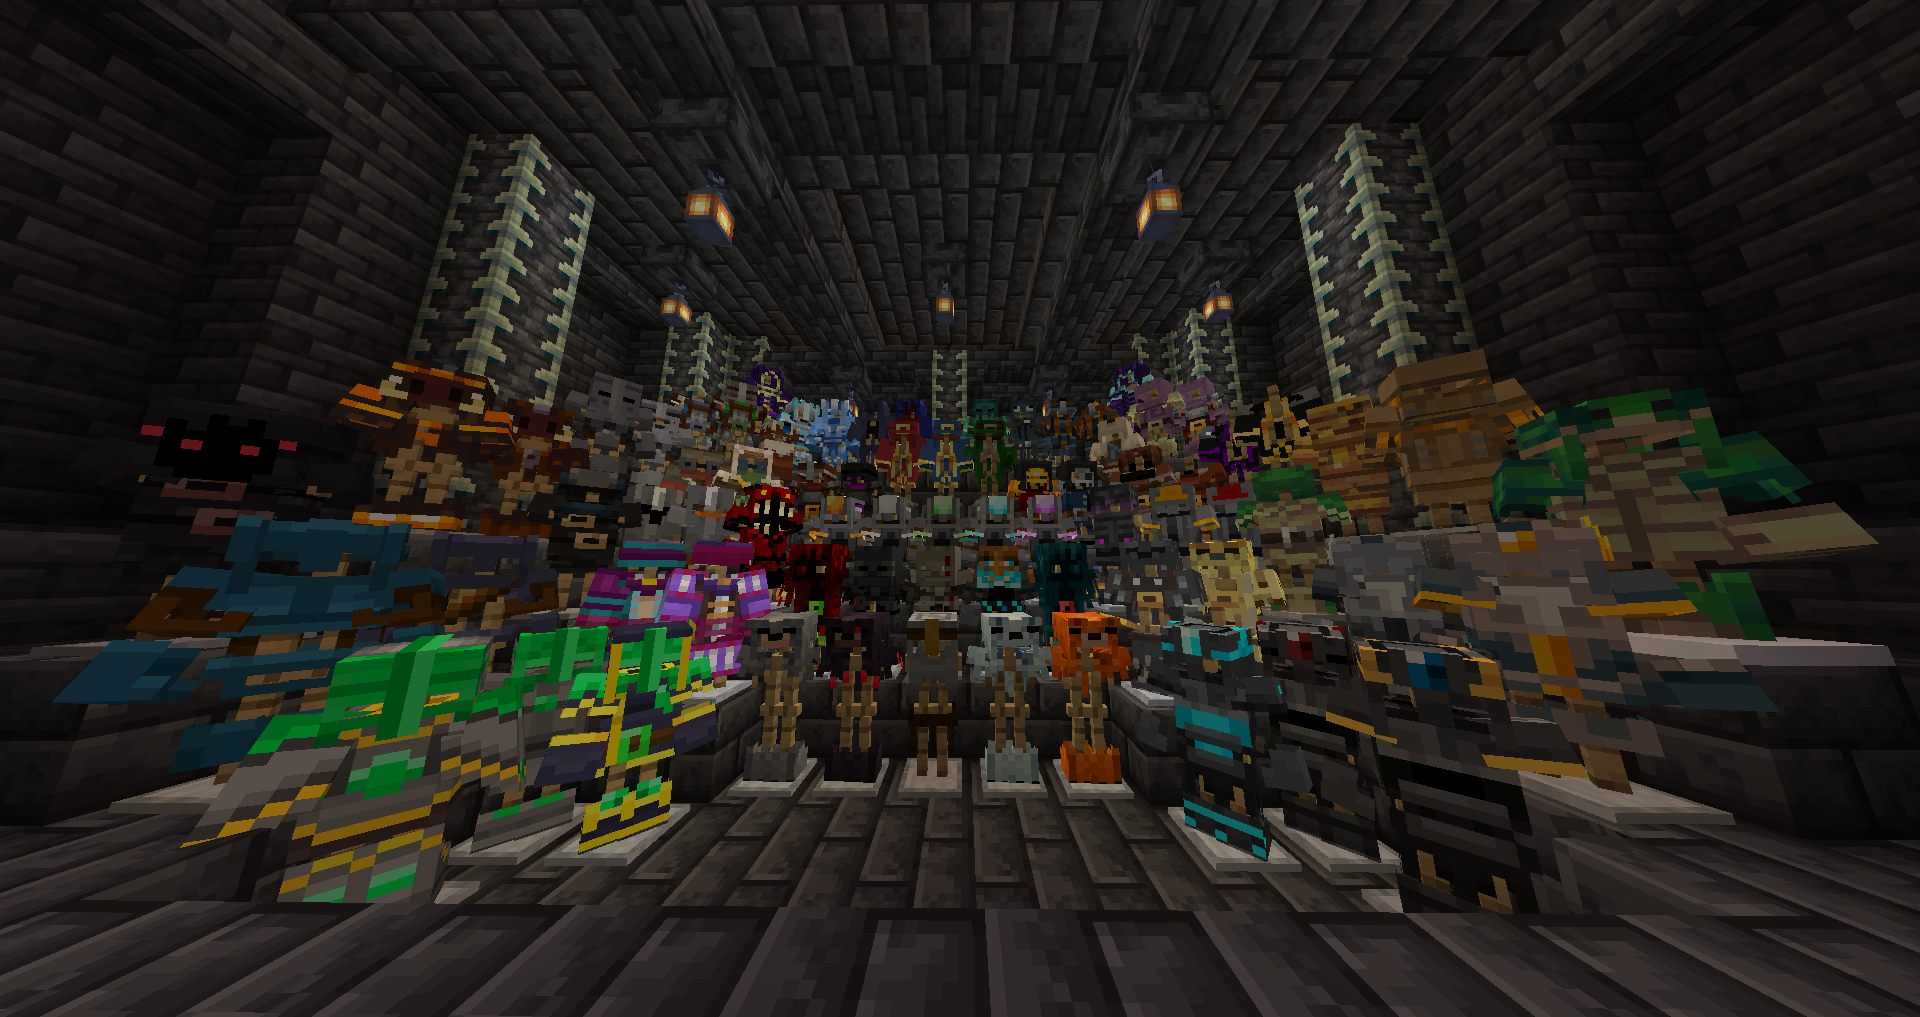 This image shows all of the armors added by MC Dungeons Armors, totaling 74 armor sets.